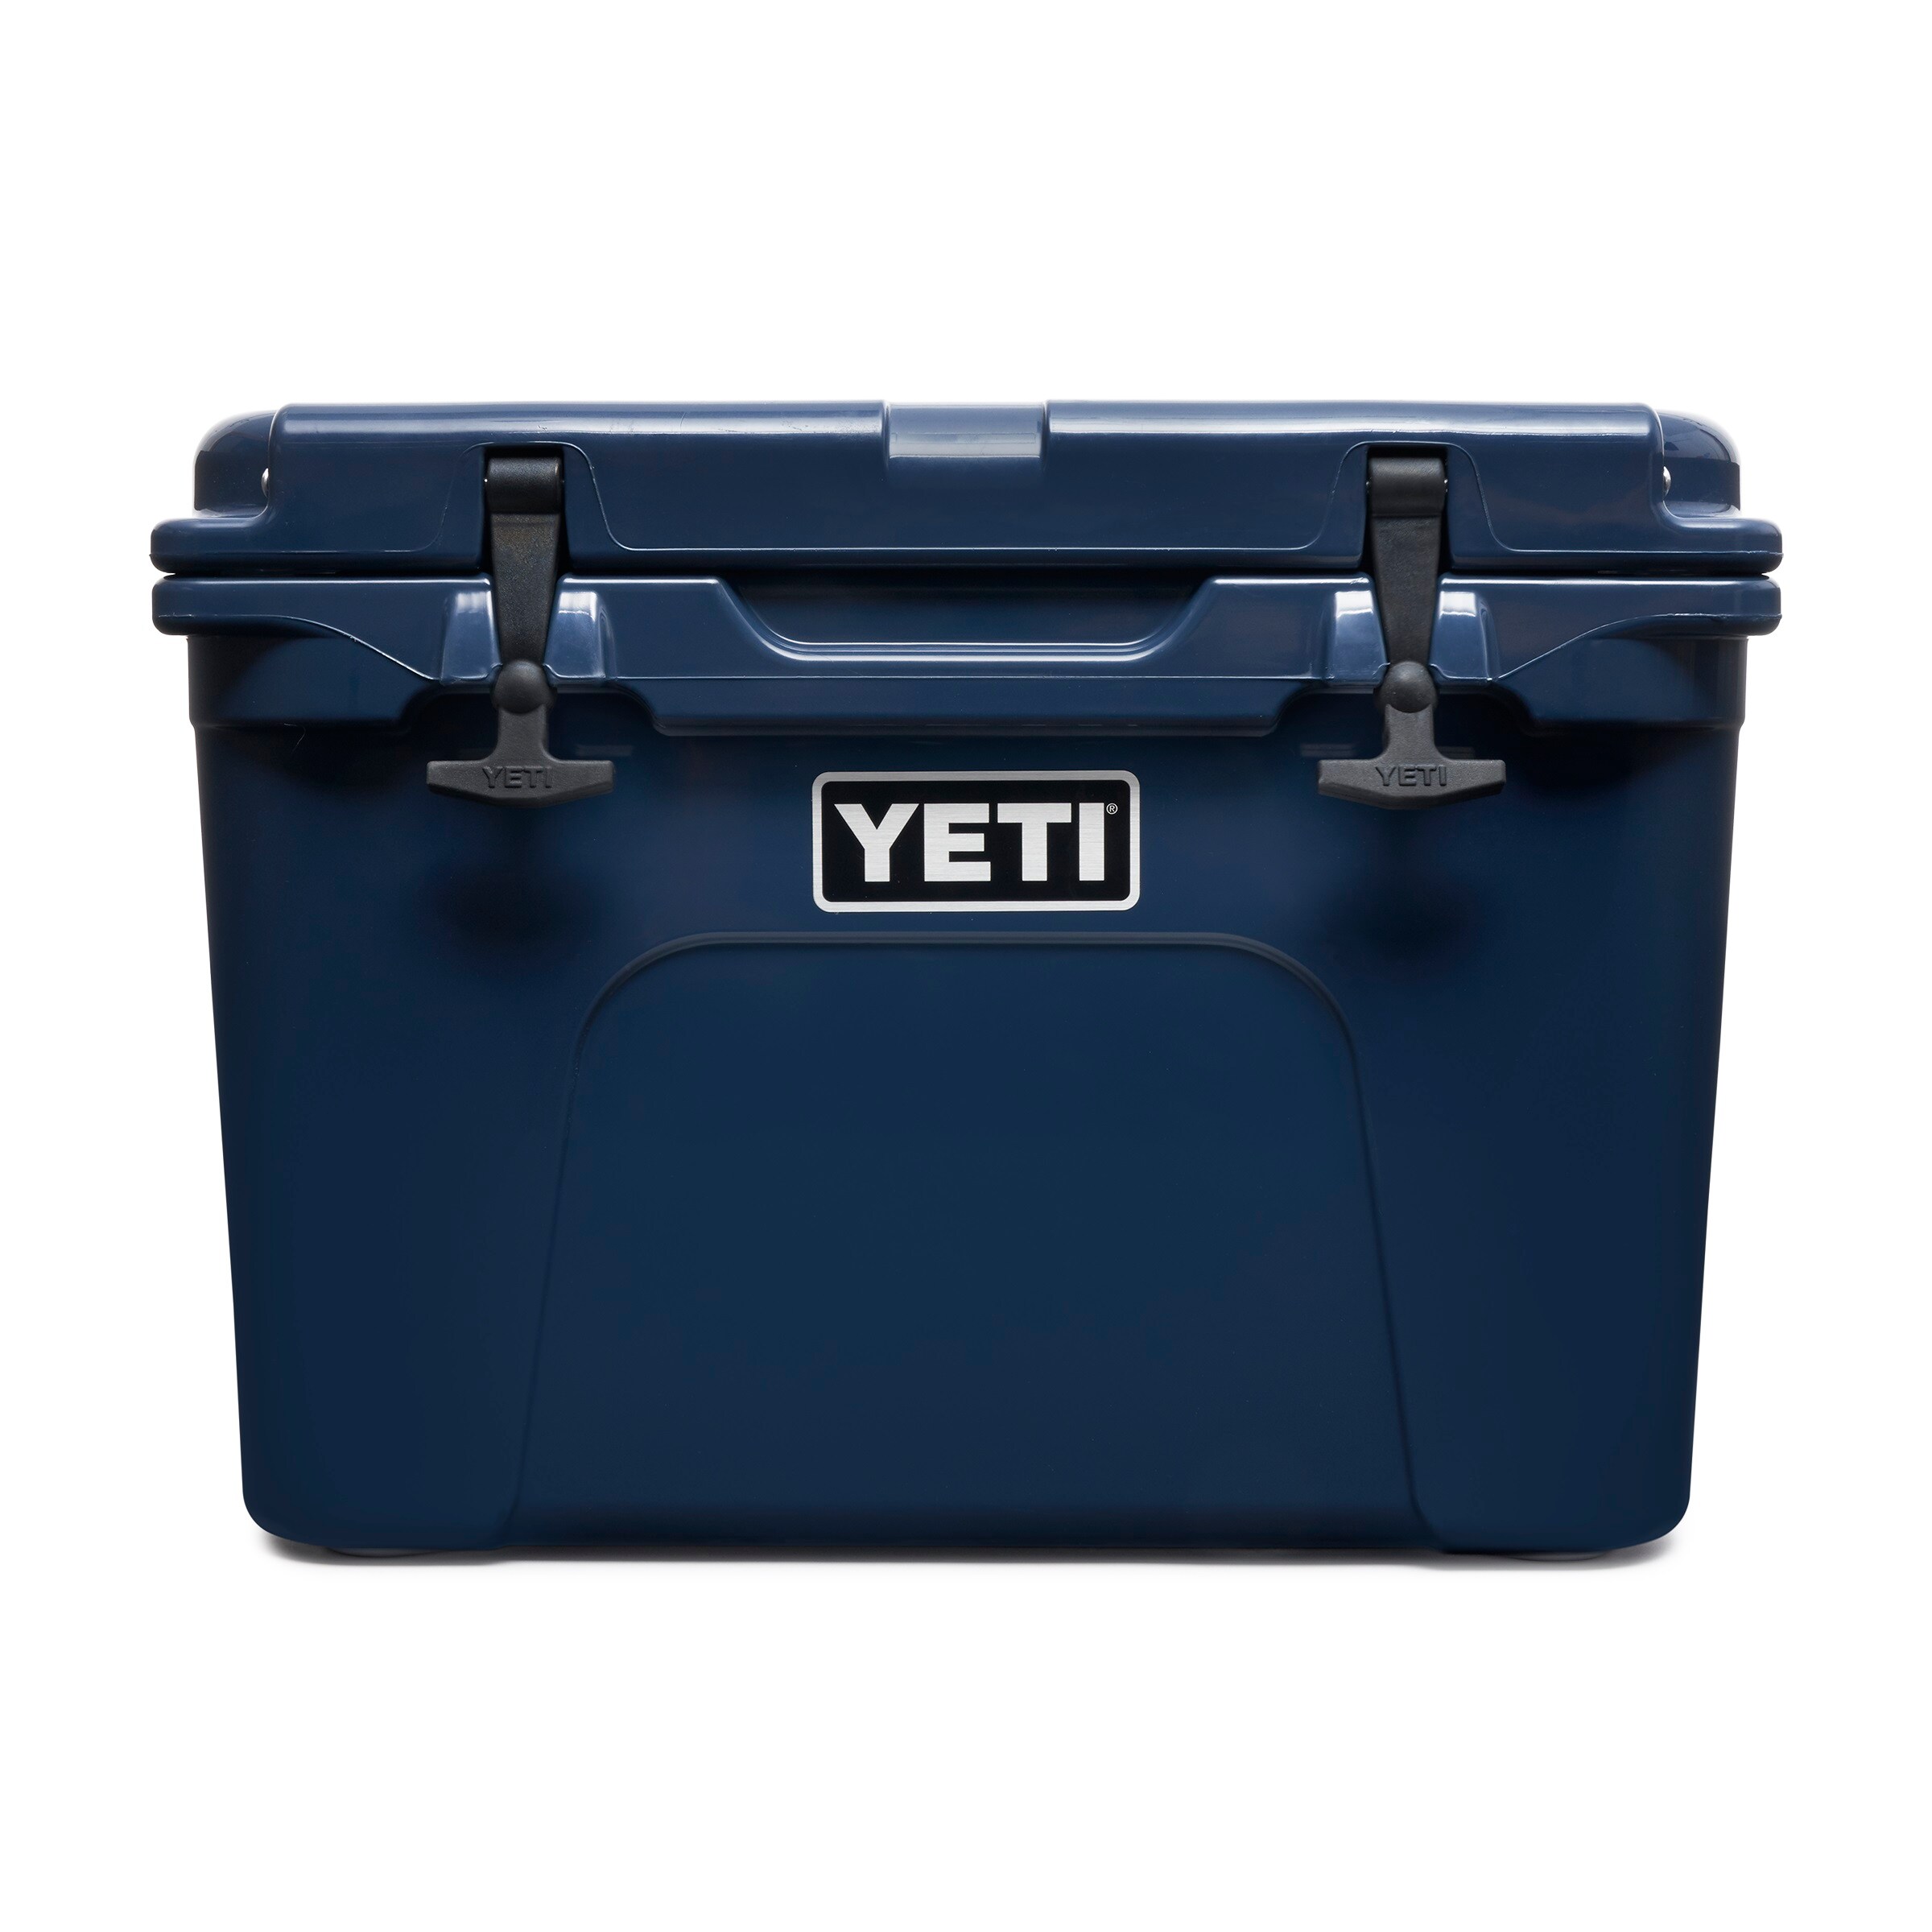 YETI Tundra 35 Insulated Chest Cooler, Navy in the Portable Coolers ...